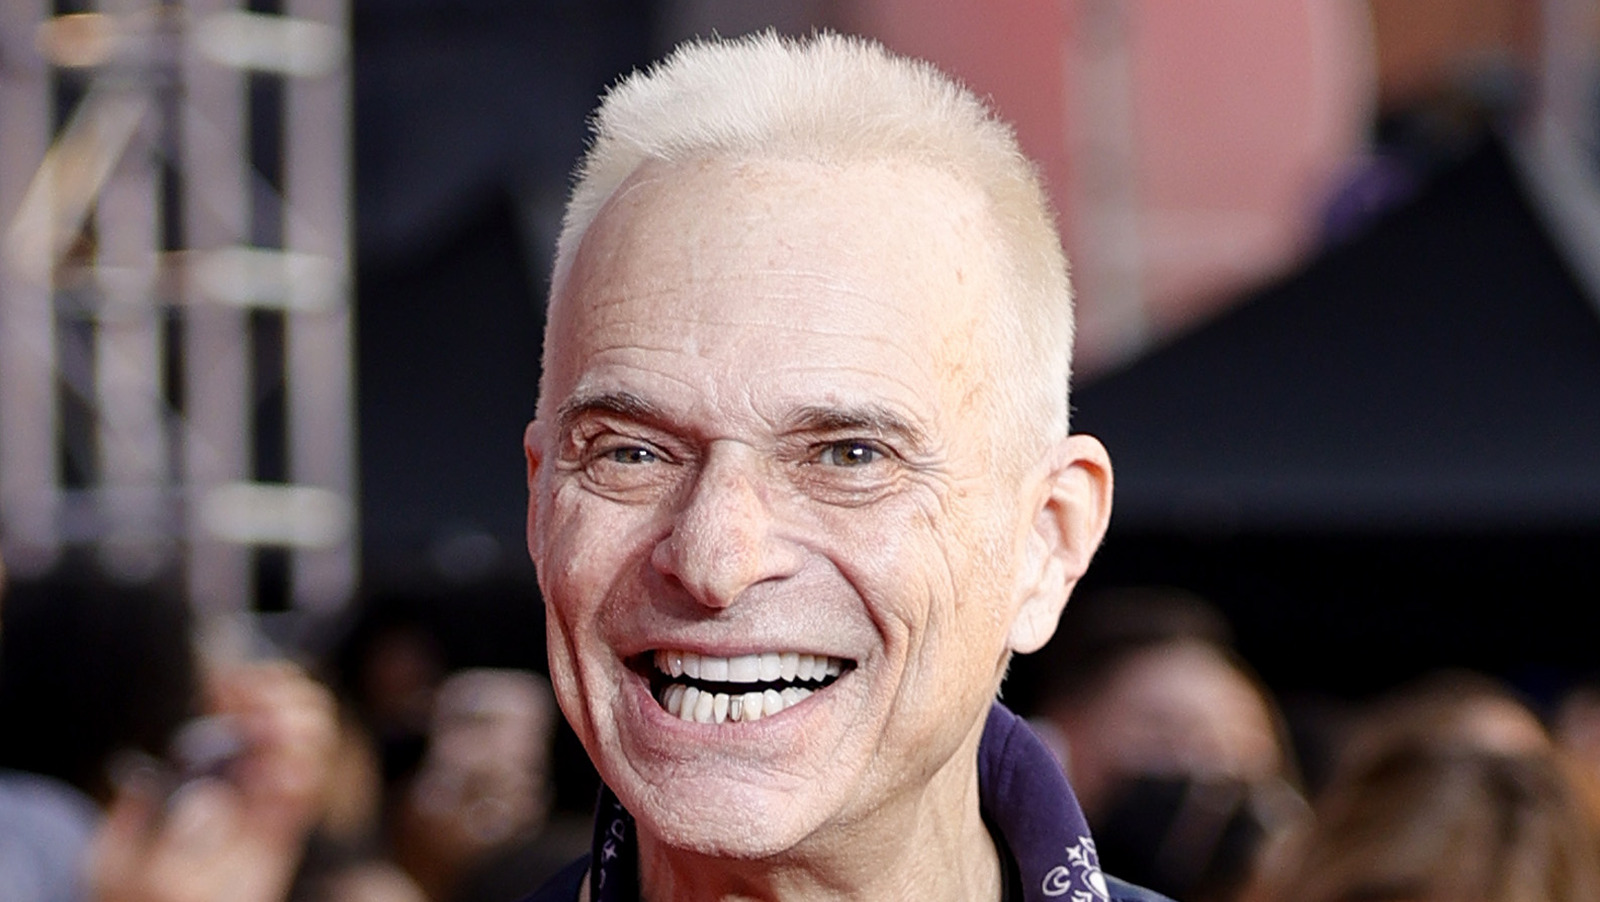 David Lee Roth Has News That Fans May Not Like